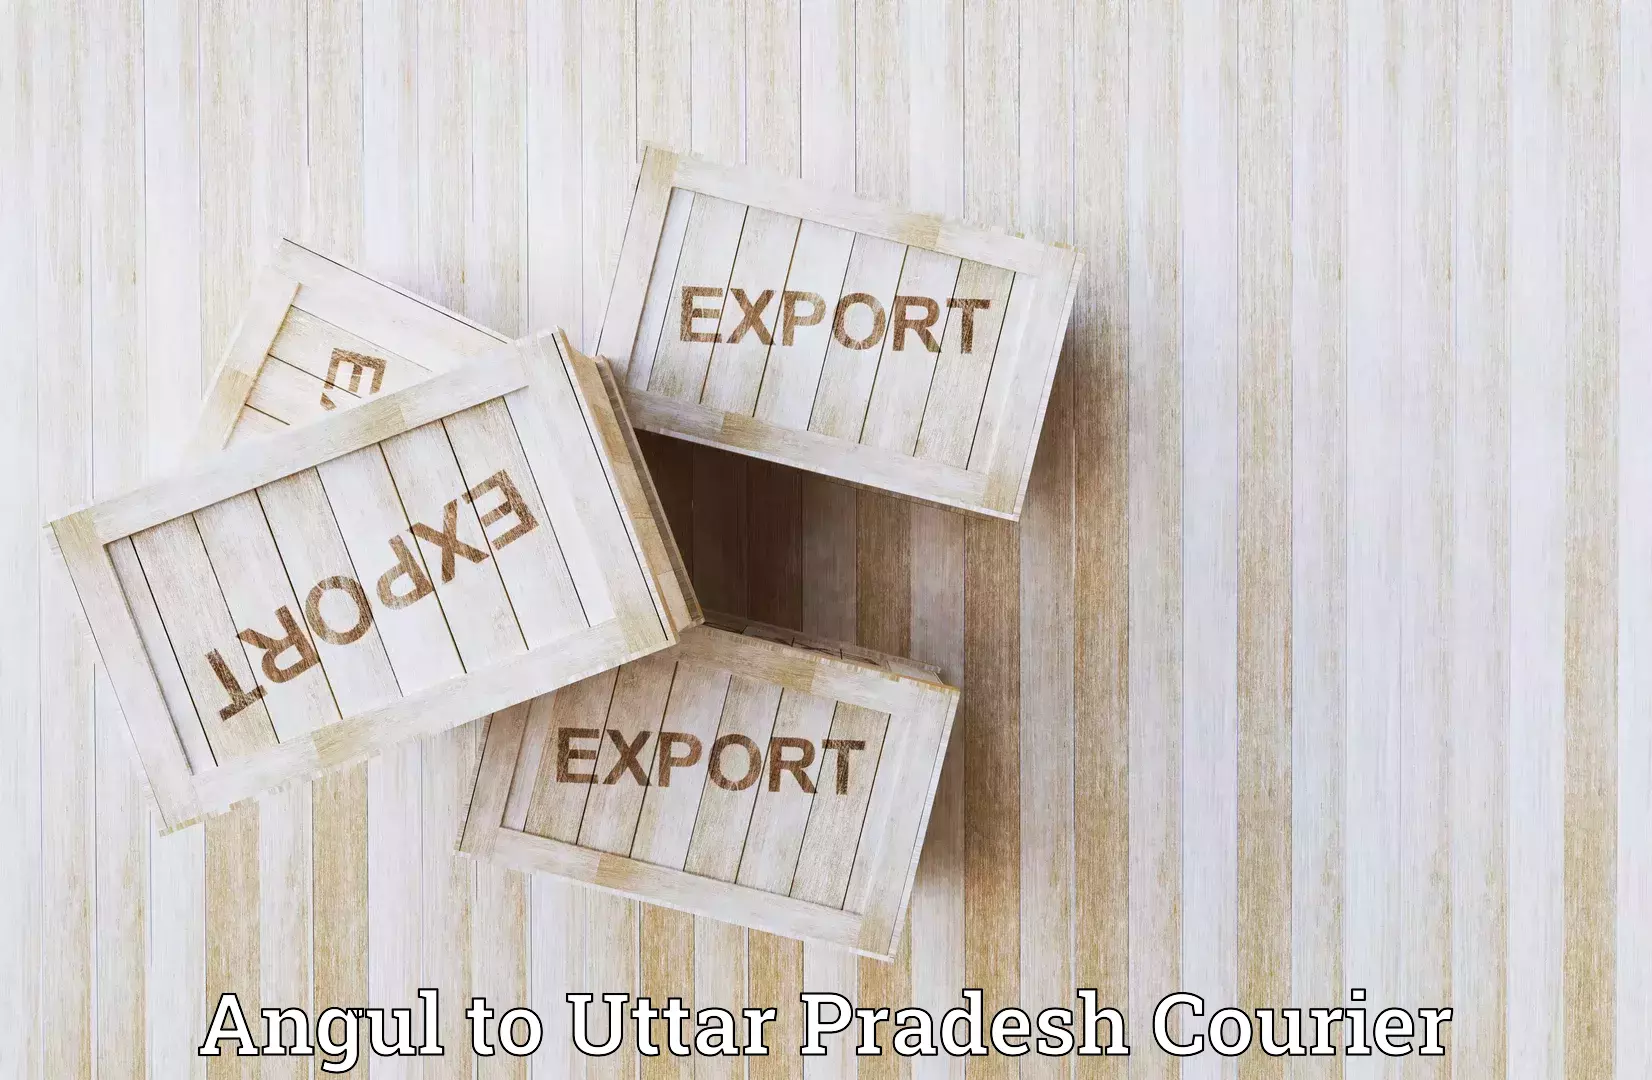 Comprehensive freight services Angul to Baghpat